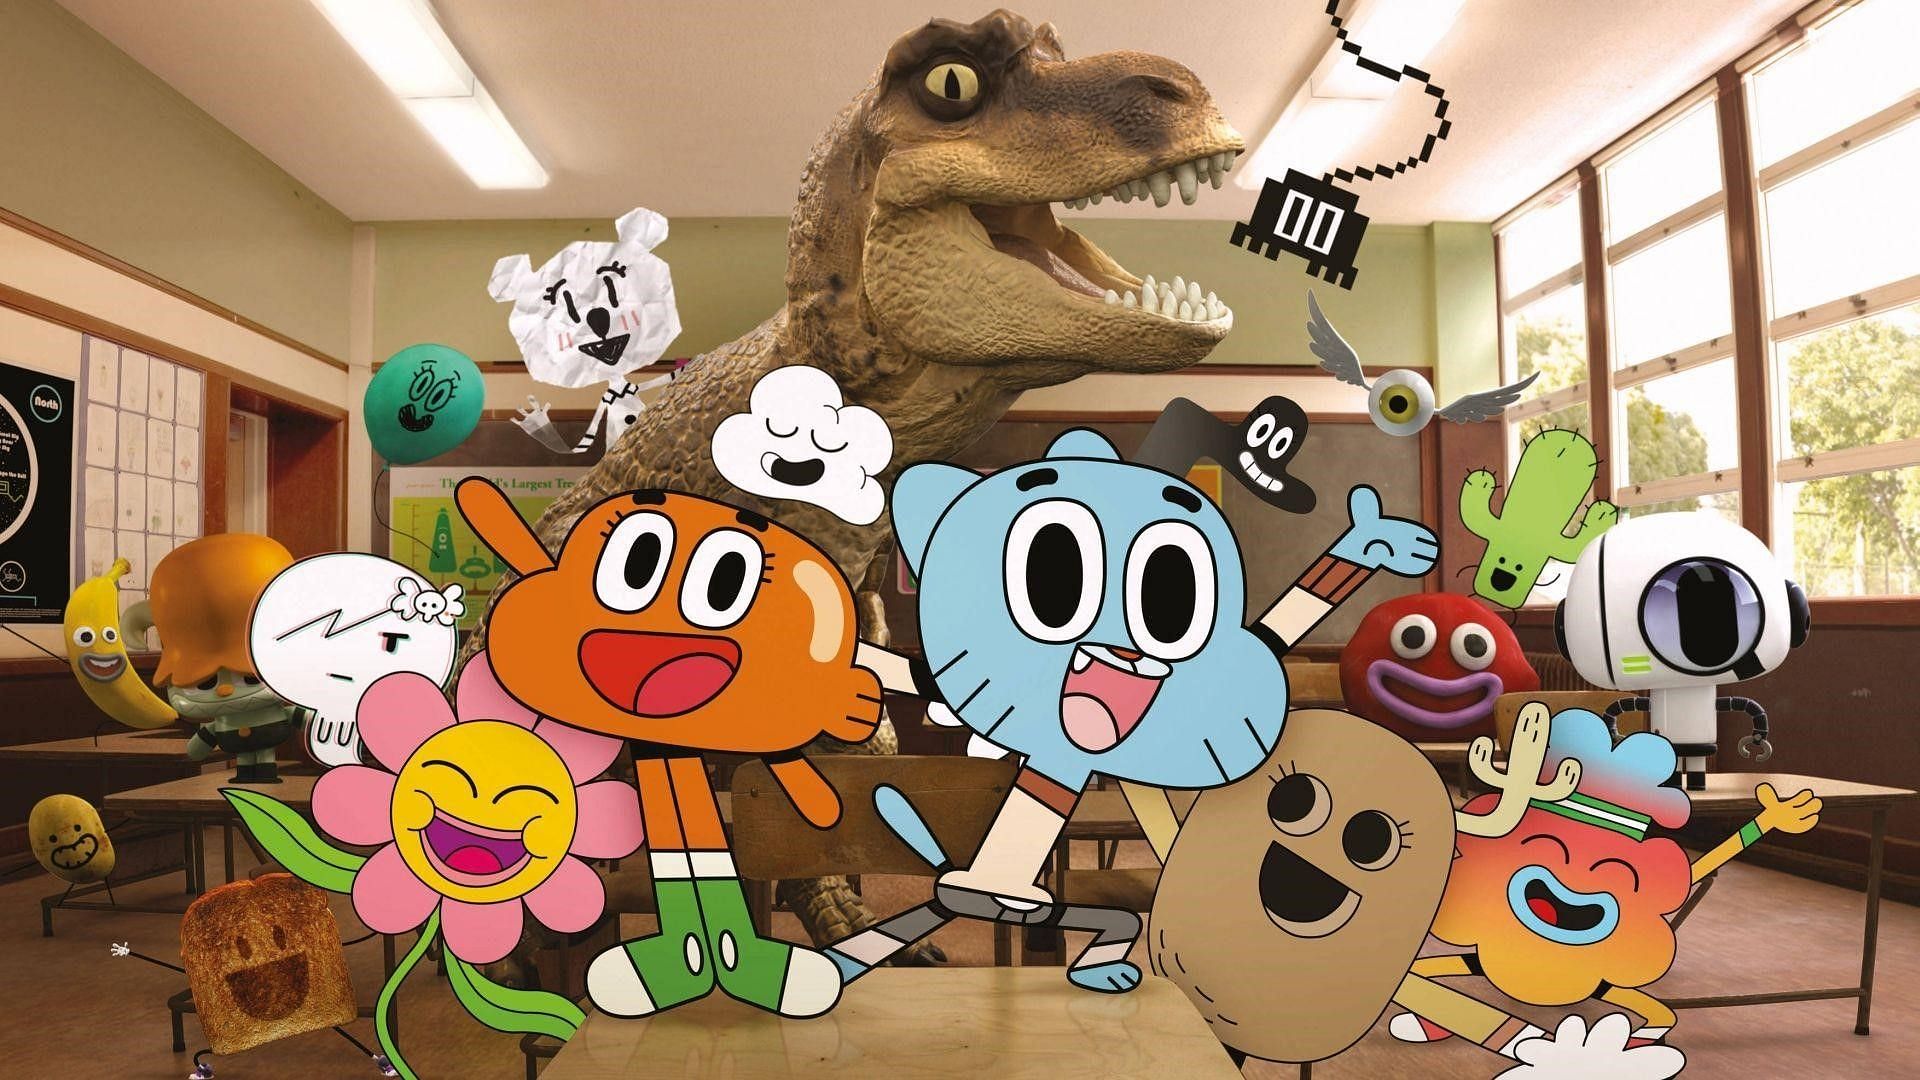 As of 26 September 2023, there is no official release date for The Amazing World of Gumball Season 7, but it is expected to premiere sometime in 2024. (Image via CN)